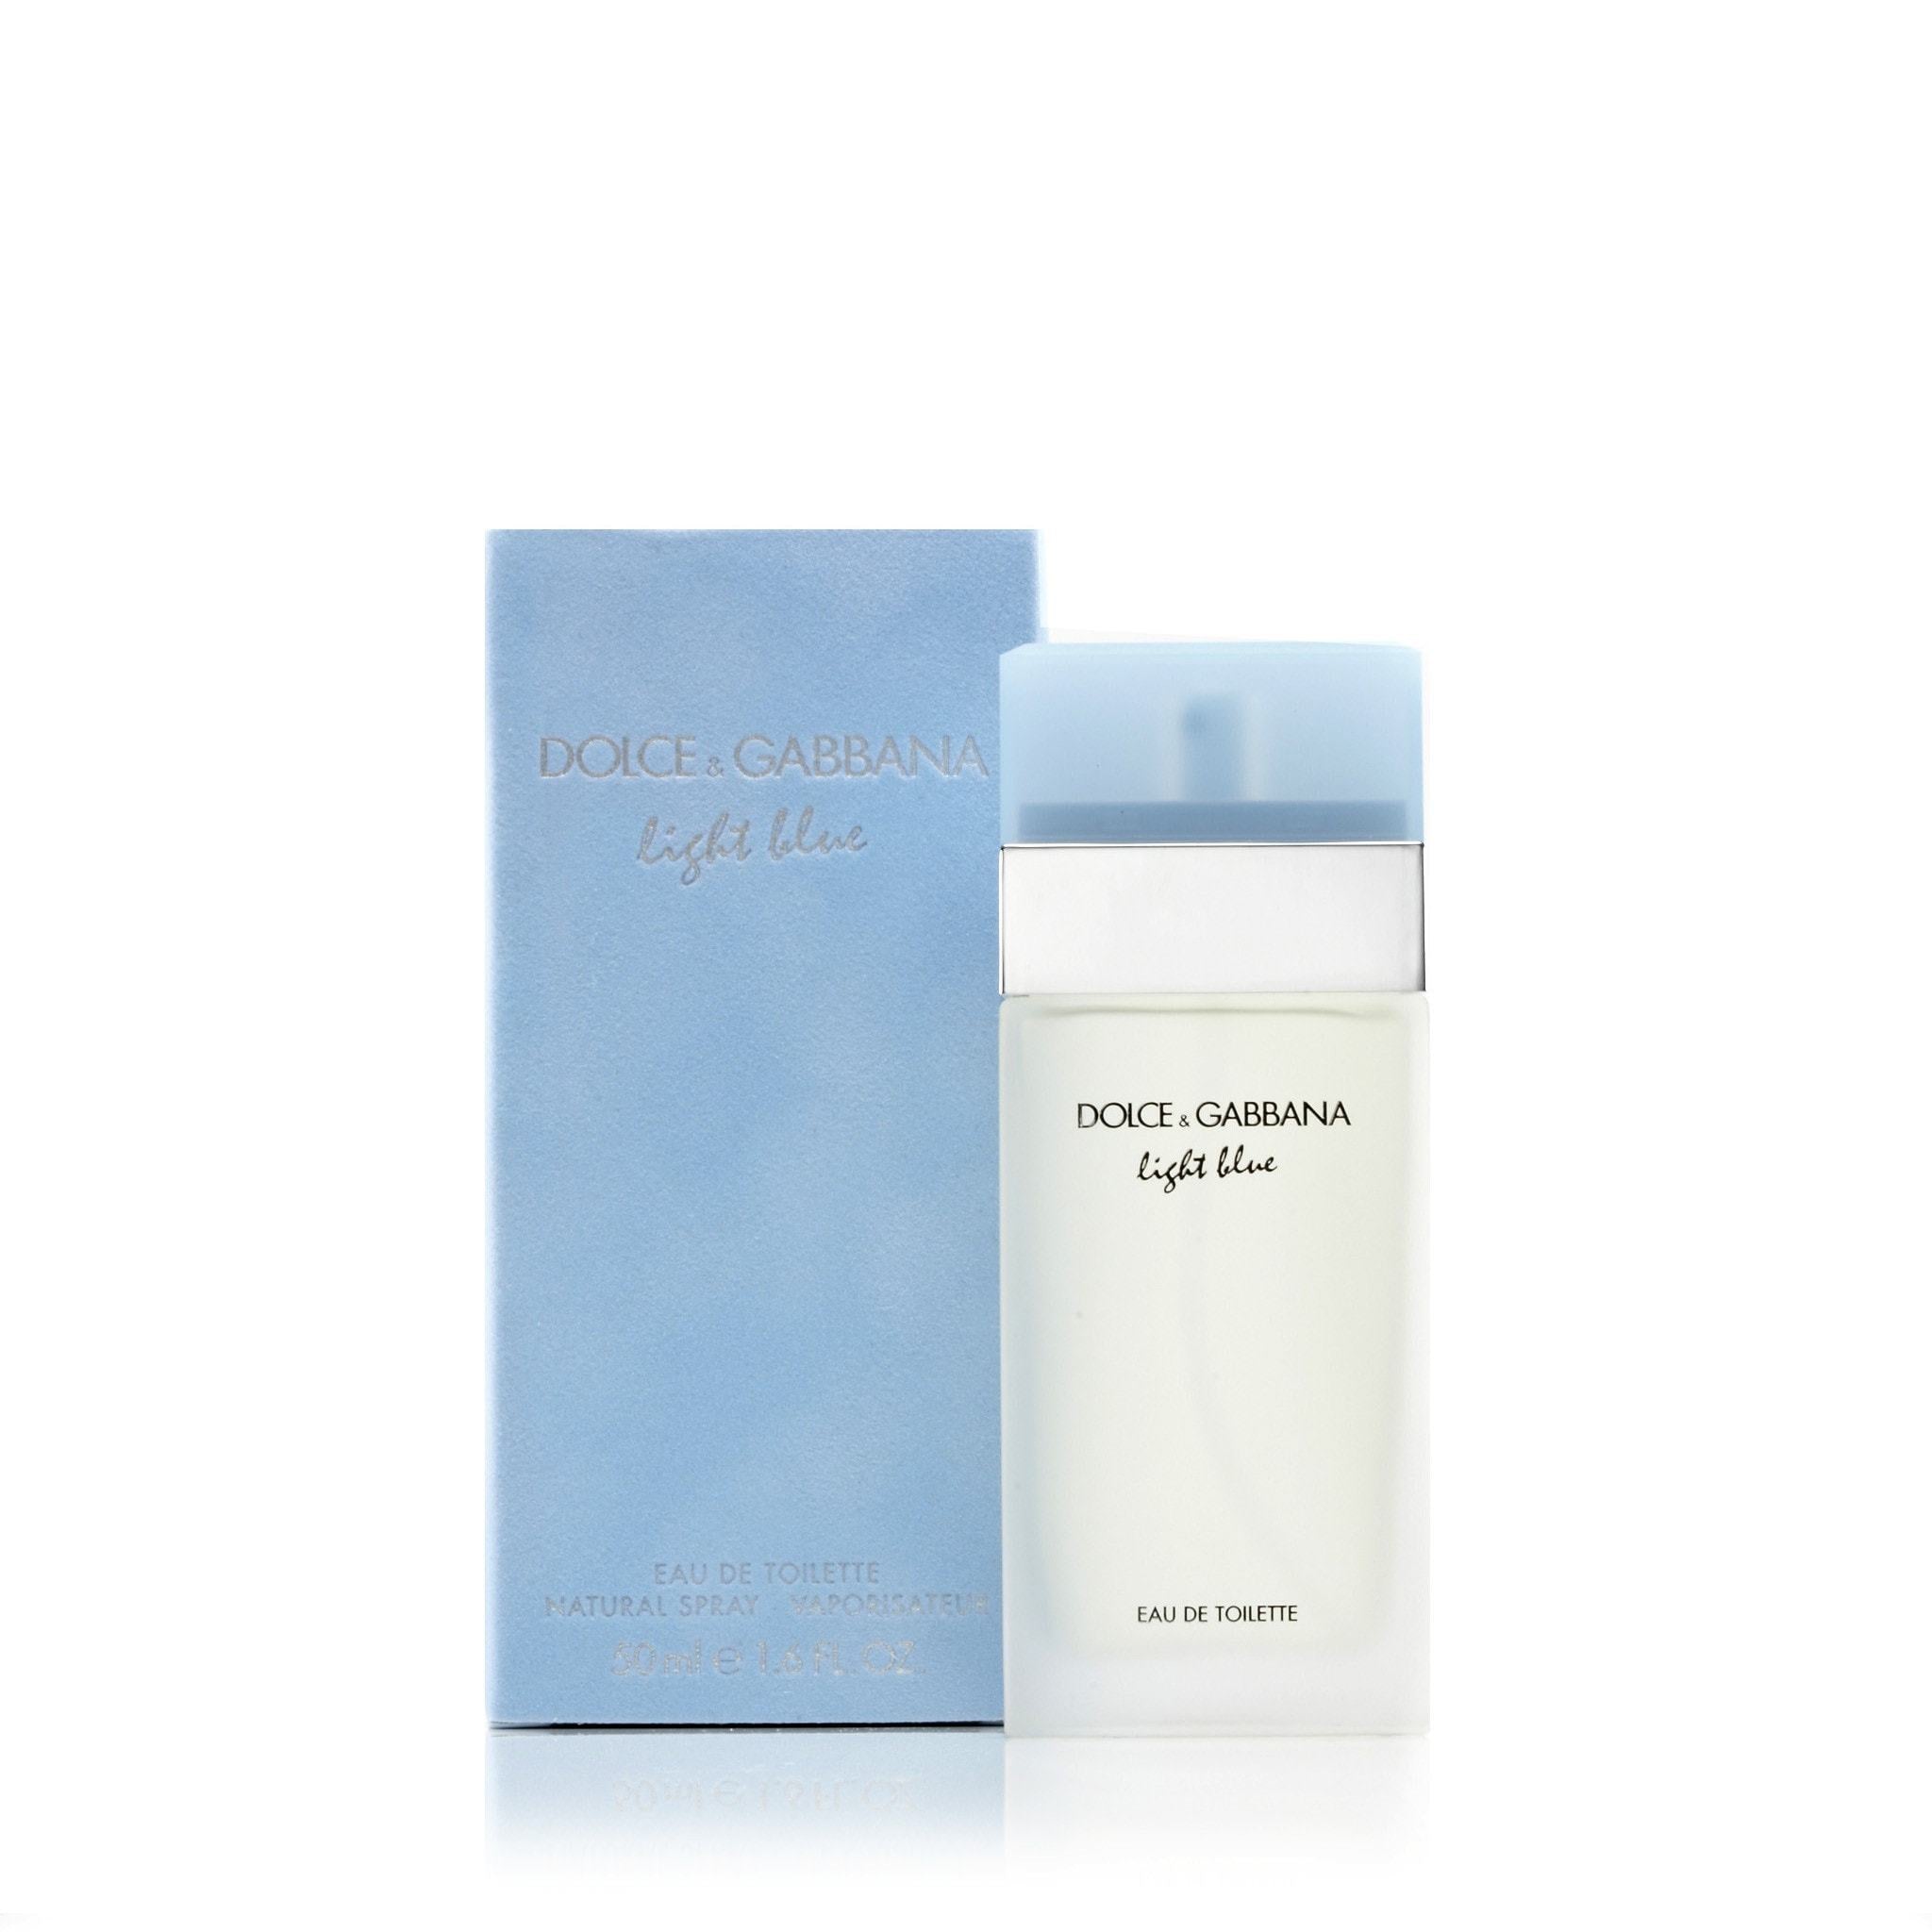 light blue by dolce & gabbana review